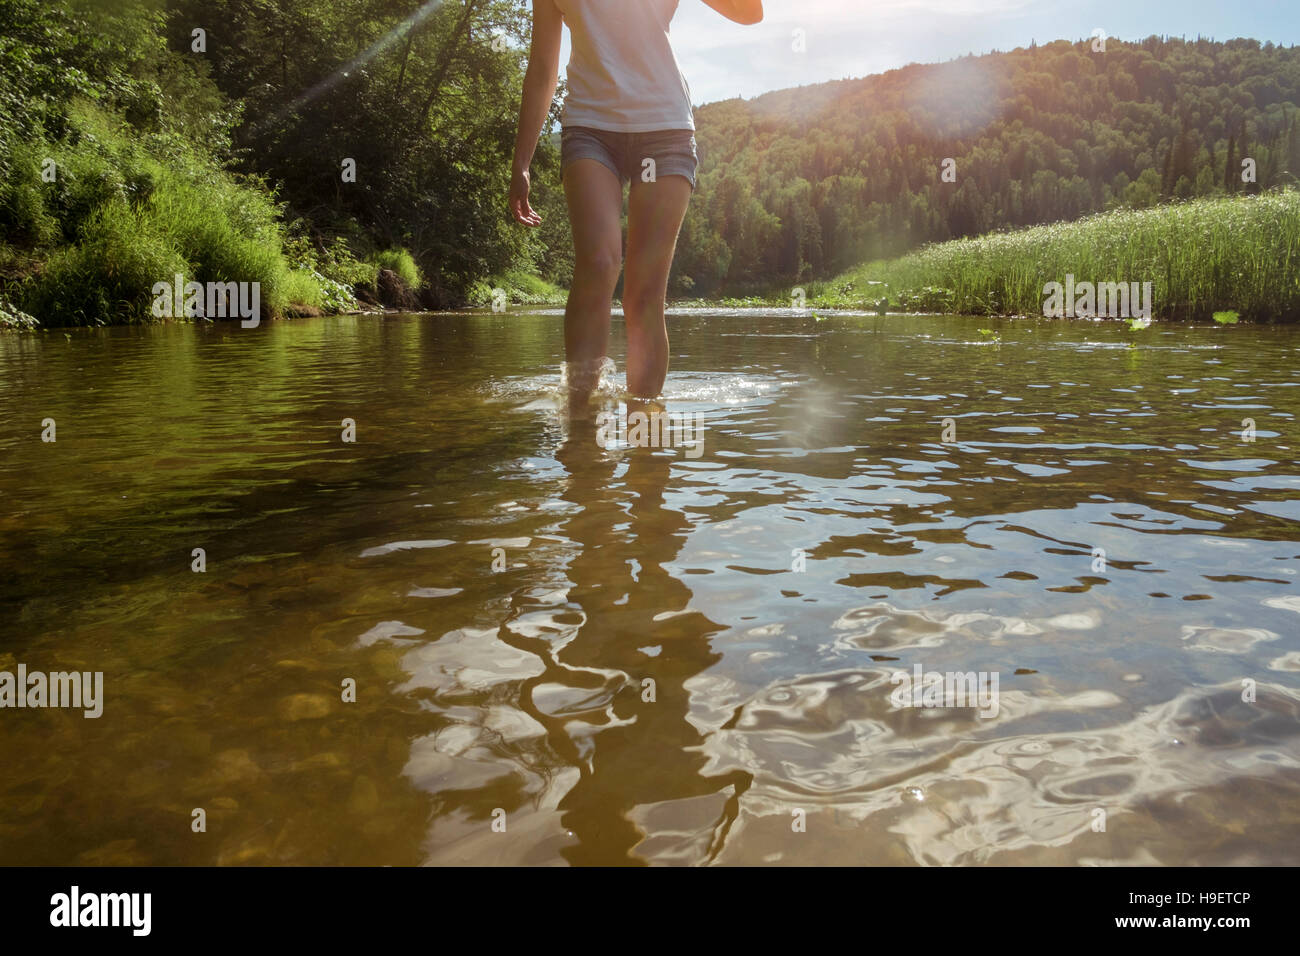 Caucasian Woman Wading In River Stock Photo Alamy